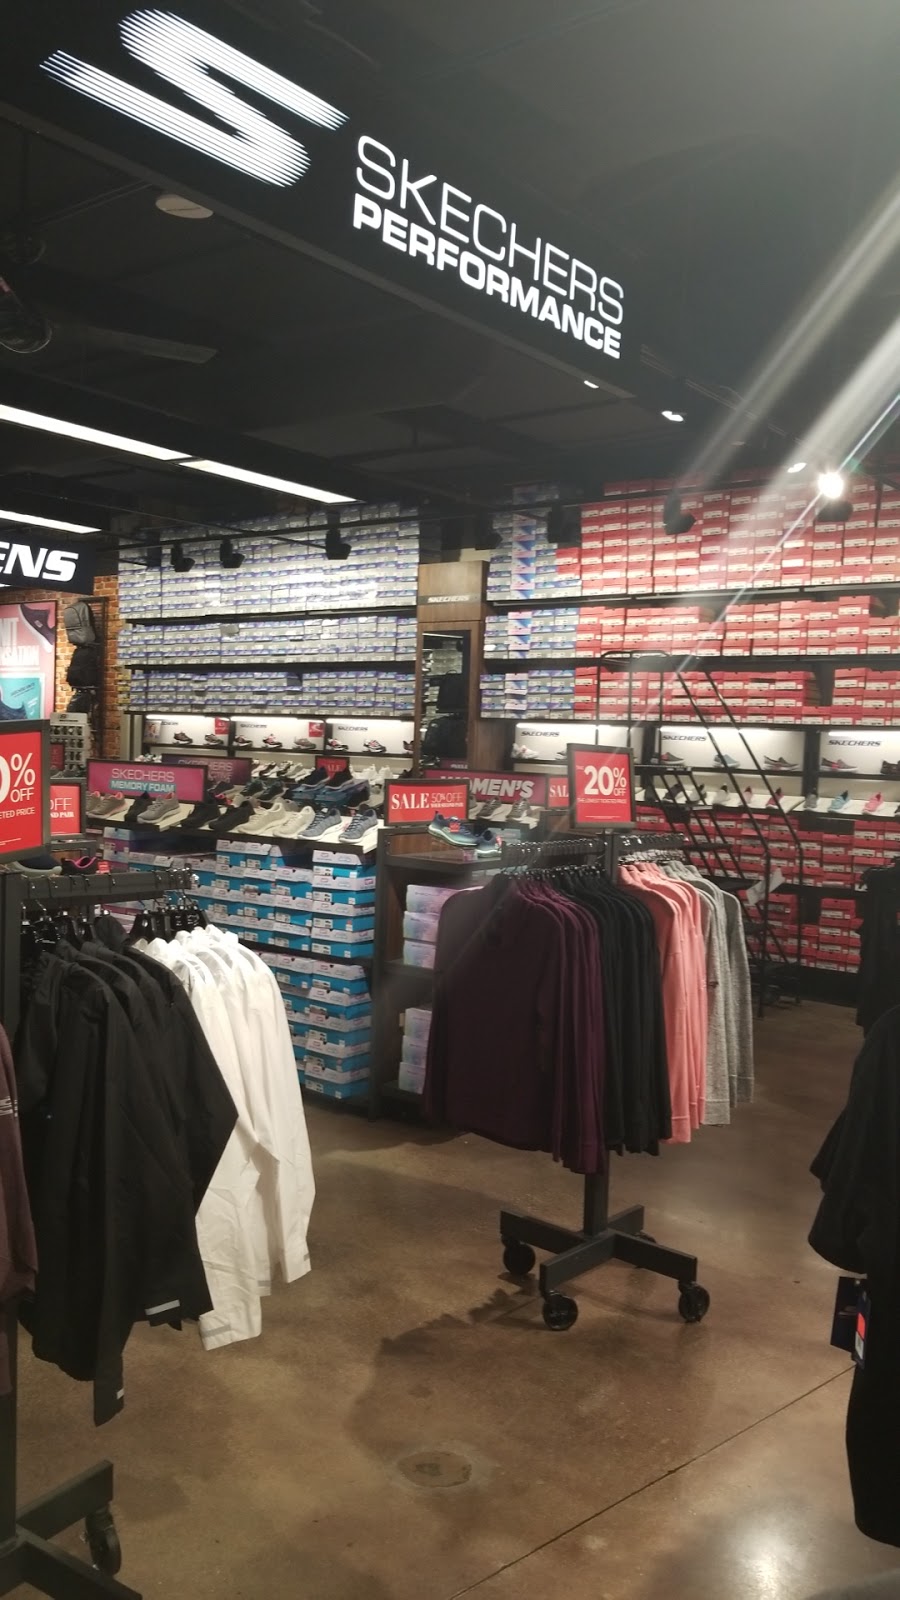 skechers outlet miami